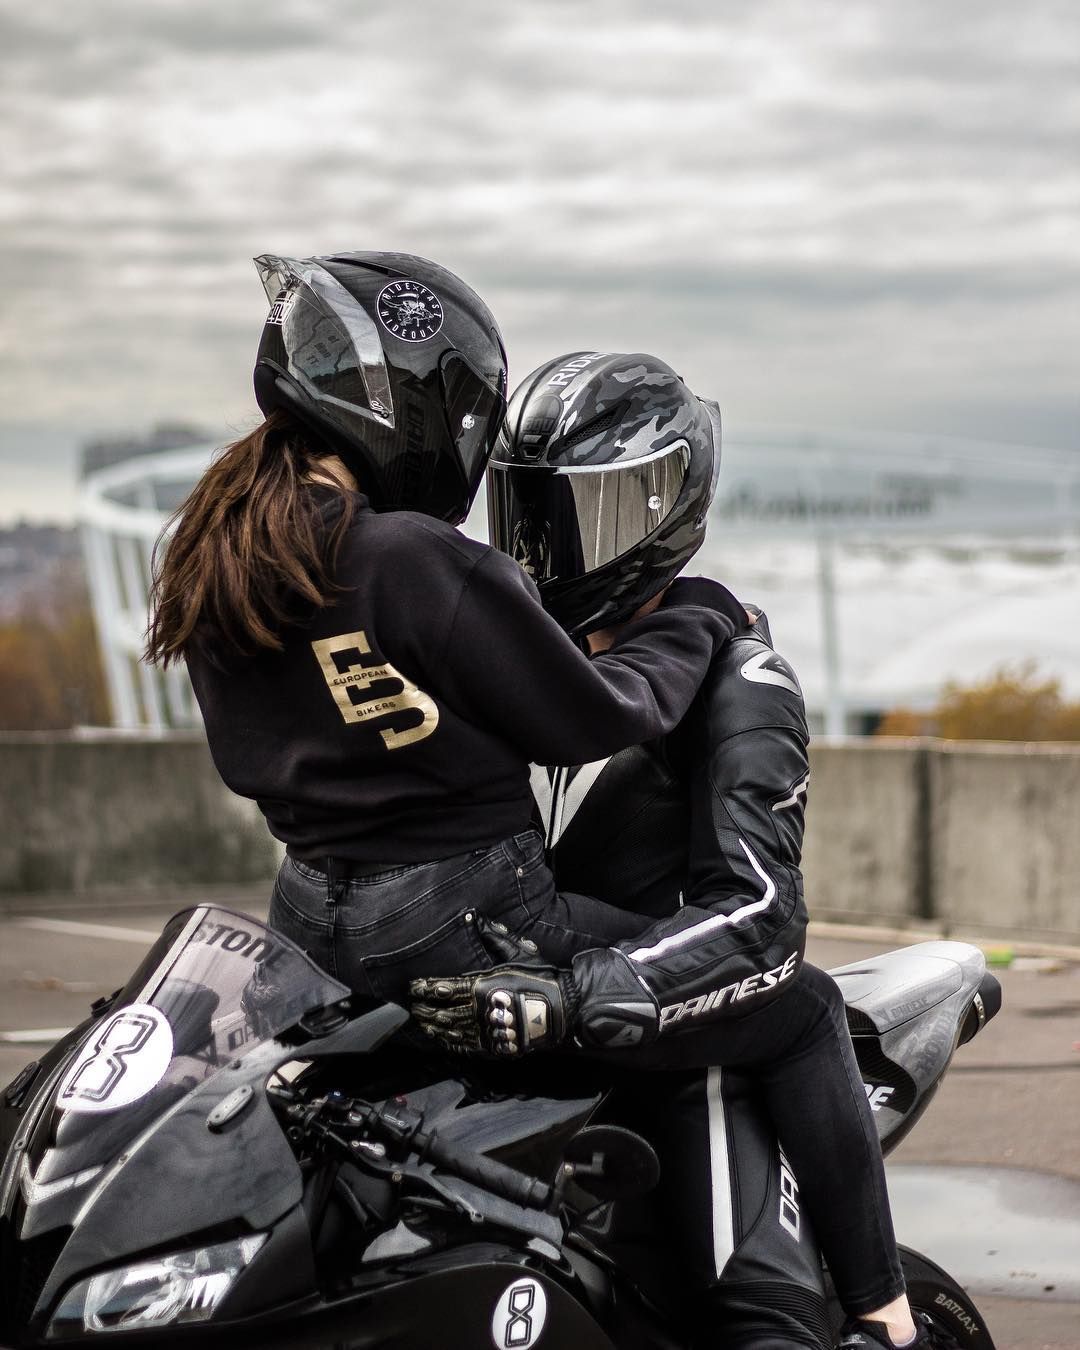 Image may contain: one or more people, motorcycle and outdoor. Biker couple, Biker love, Bike photohoot